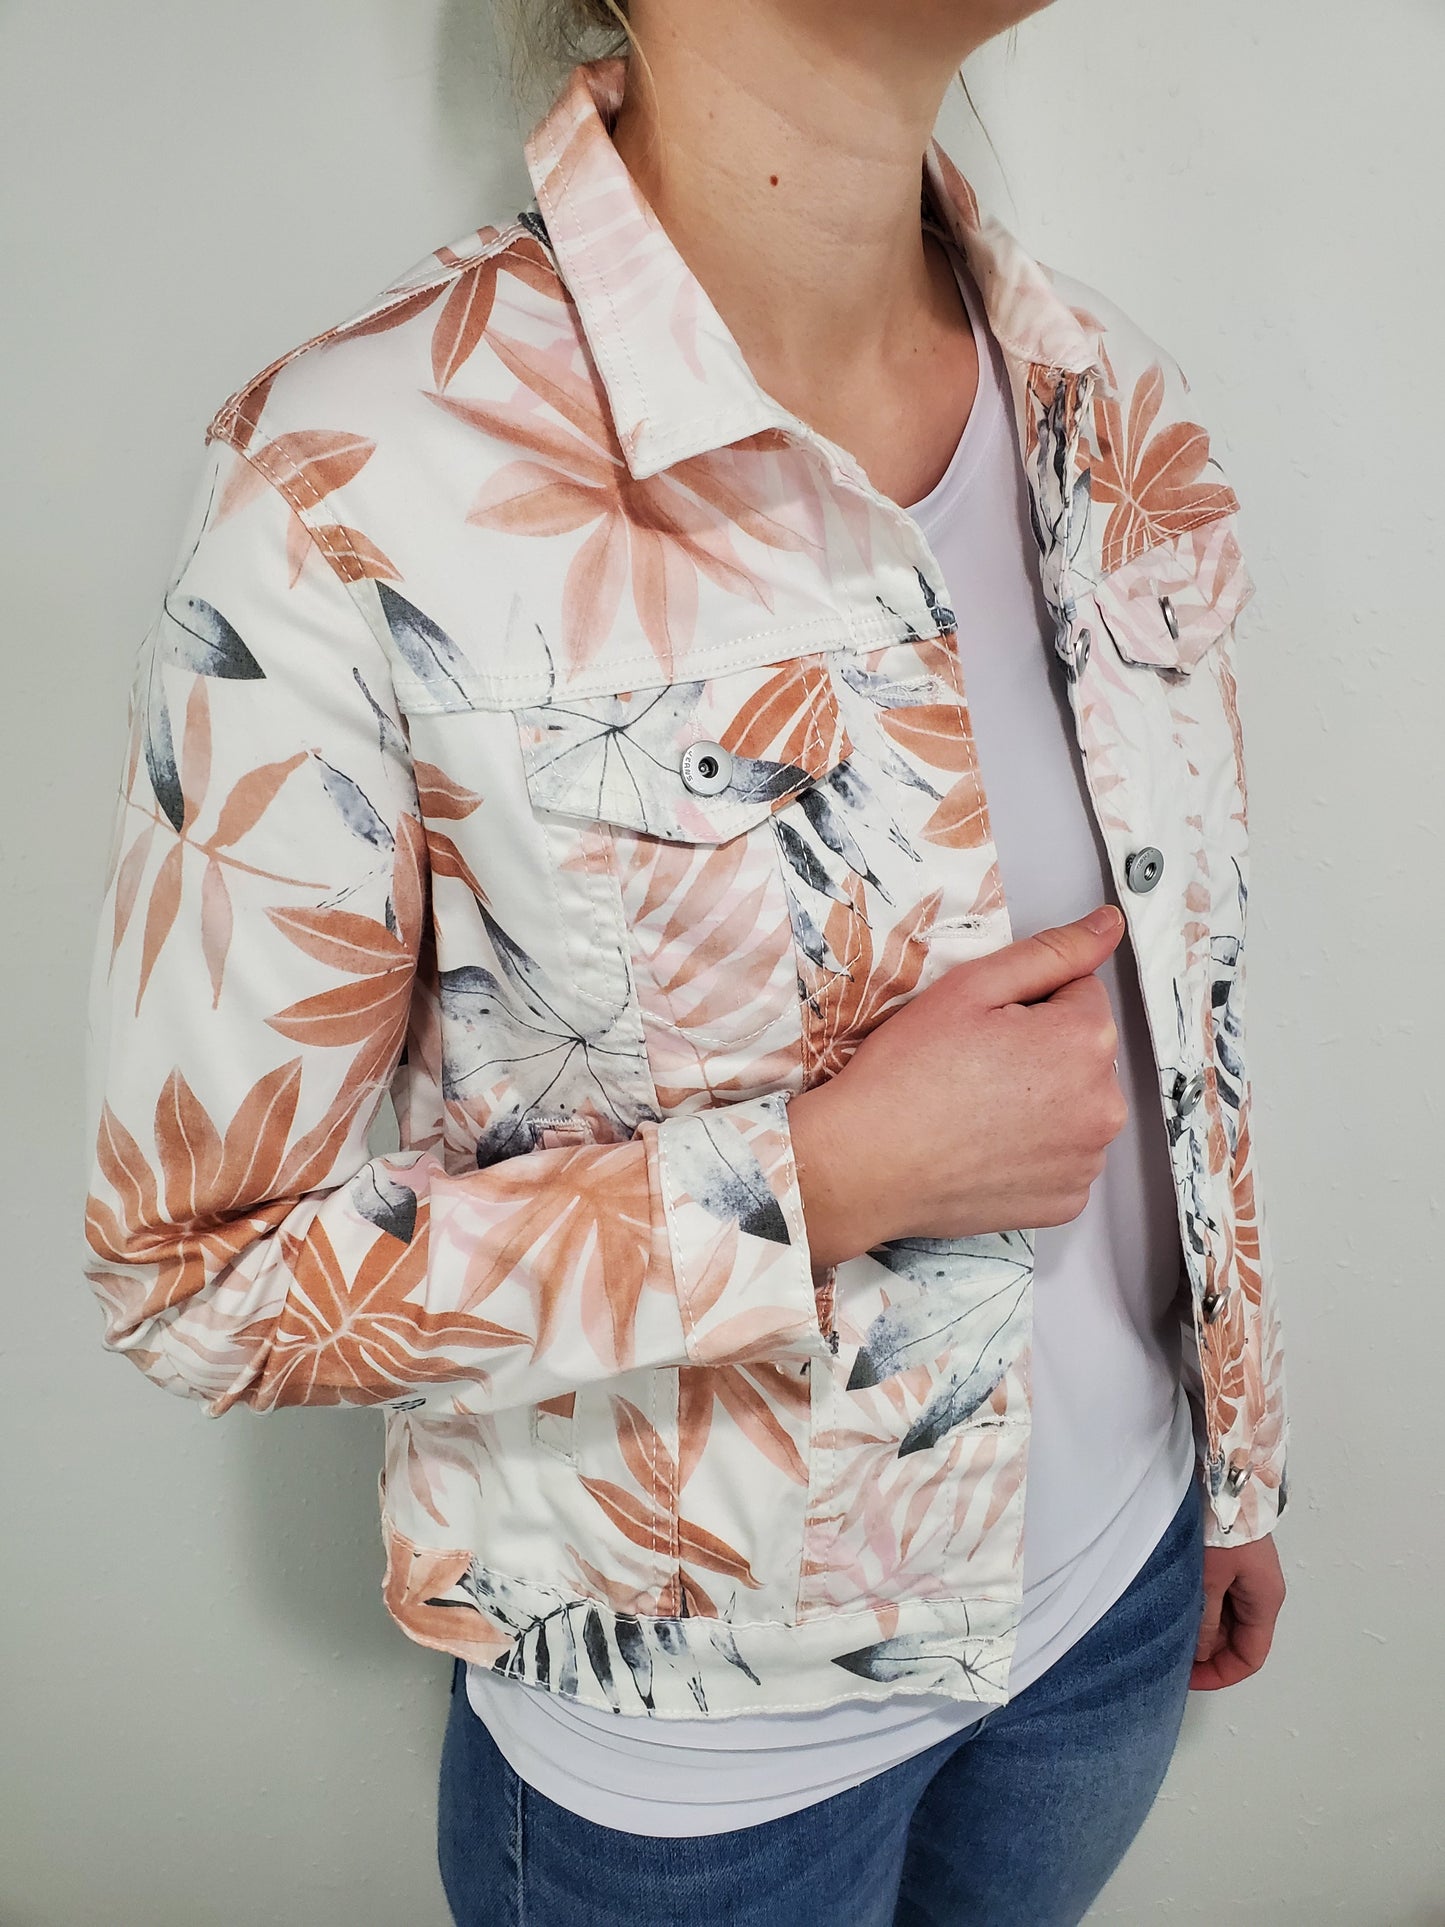 SPRING IS IN THE AIR JACKET - WHITE MULTI